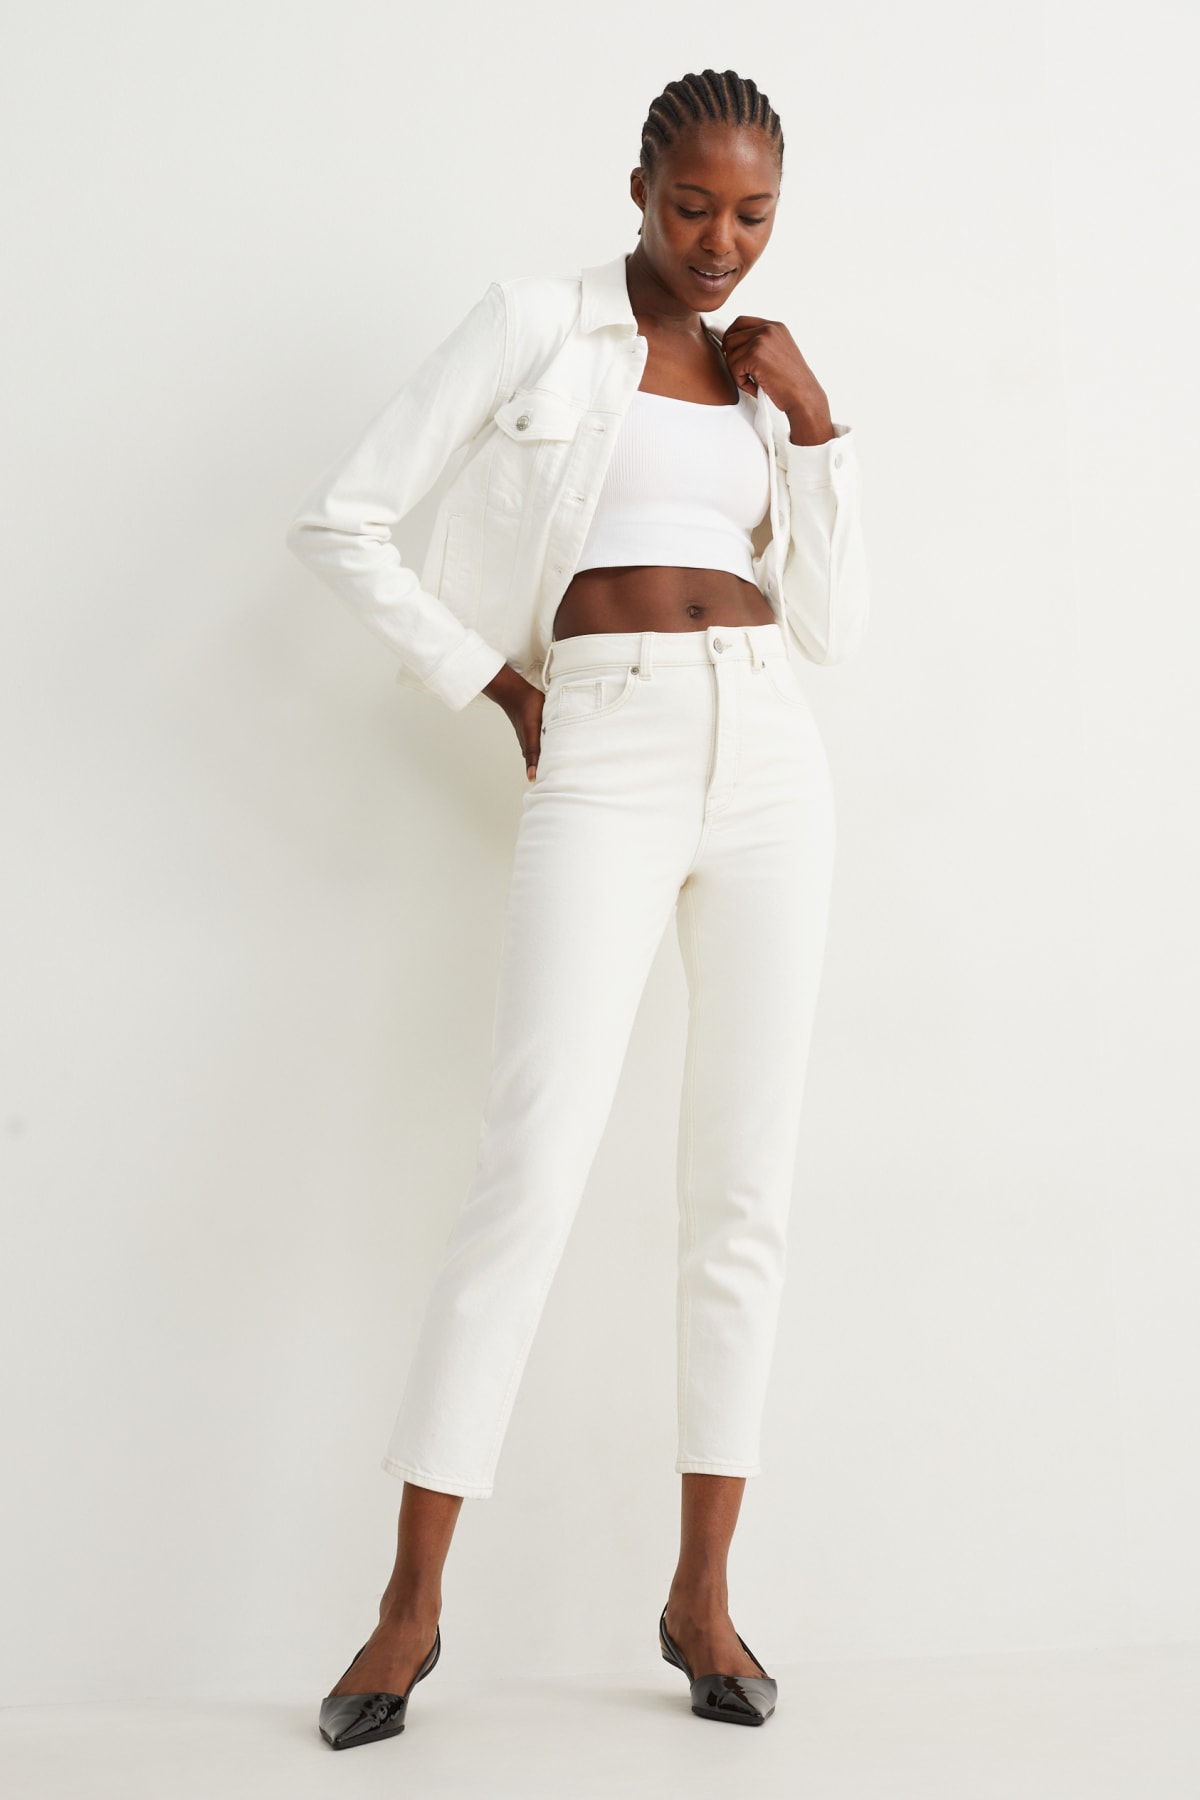 Find your perfect cropped jeans here